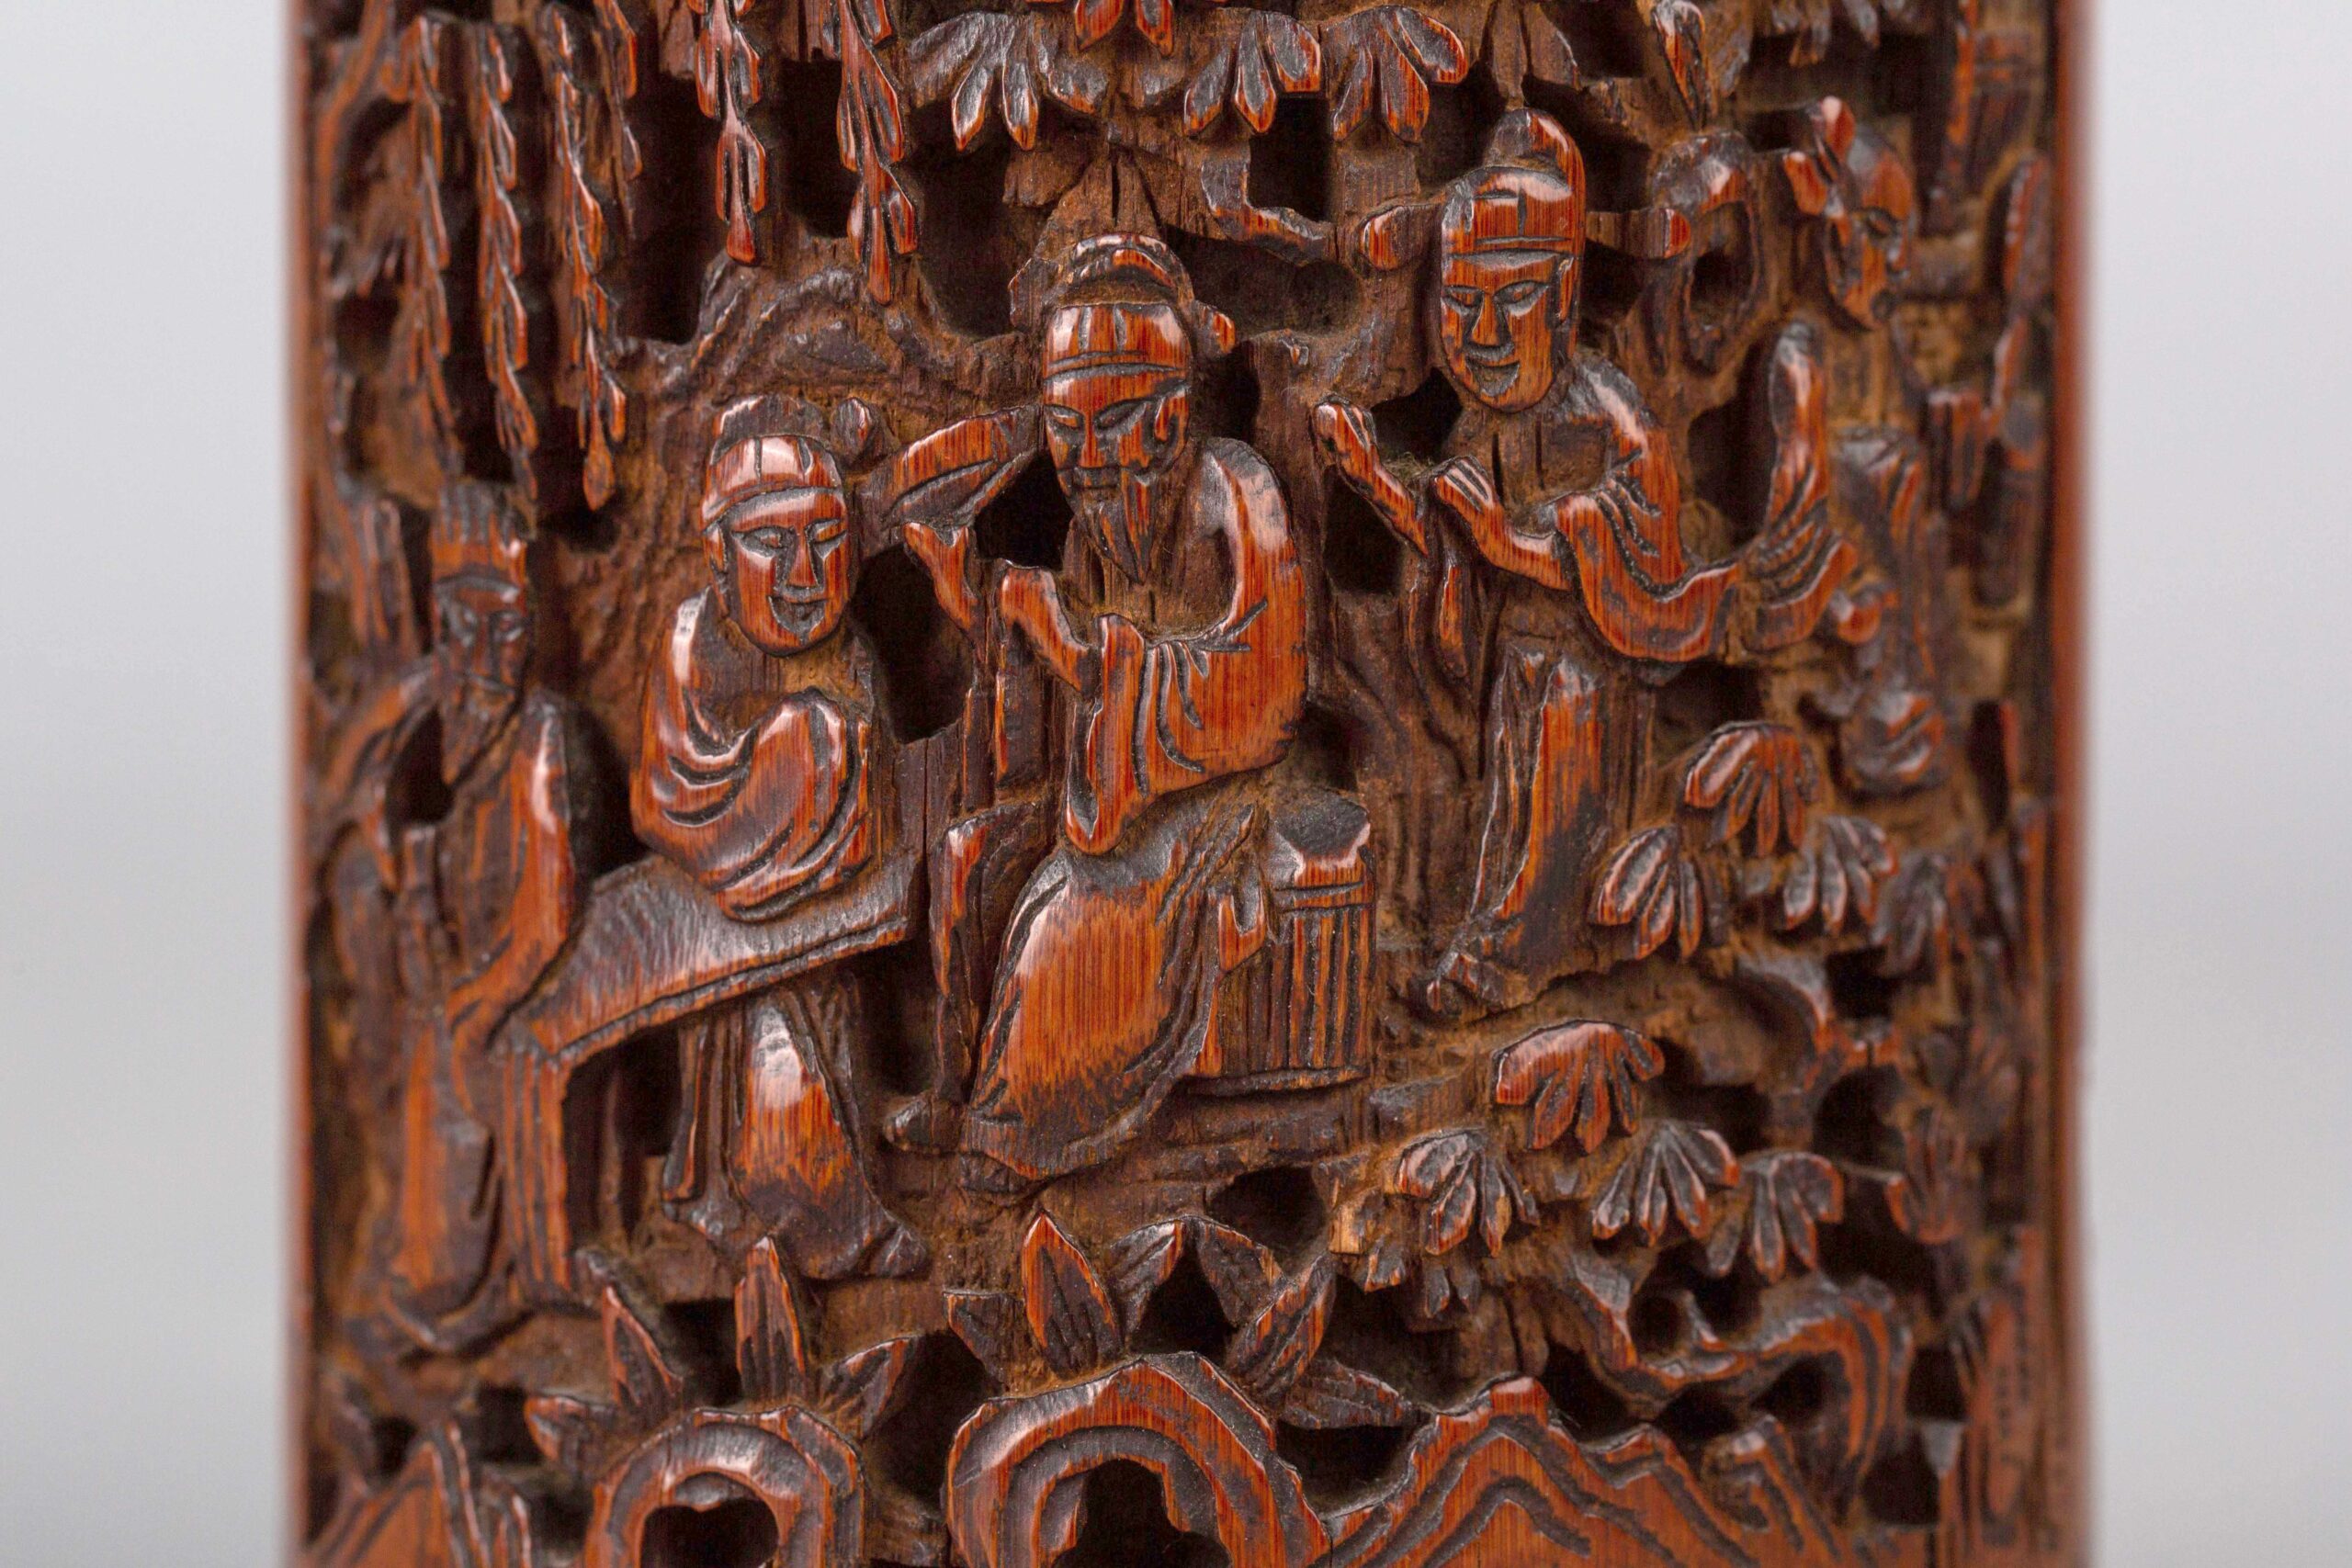 Bamboo brush holder carved phoenix and figures, late Qing dynasty 